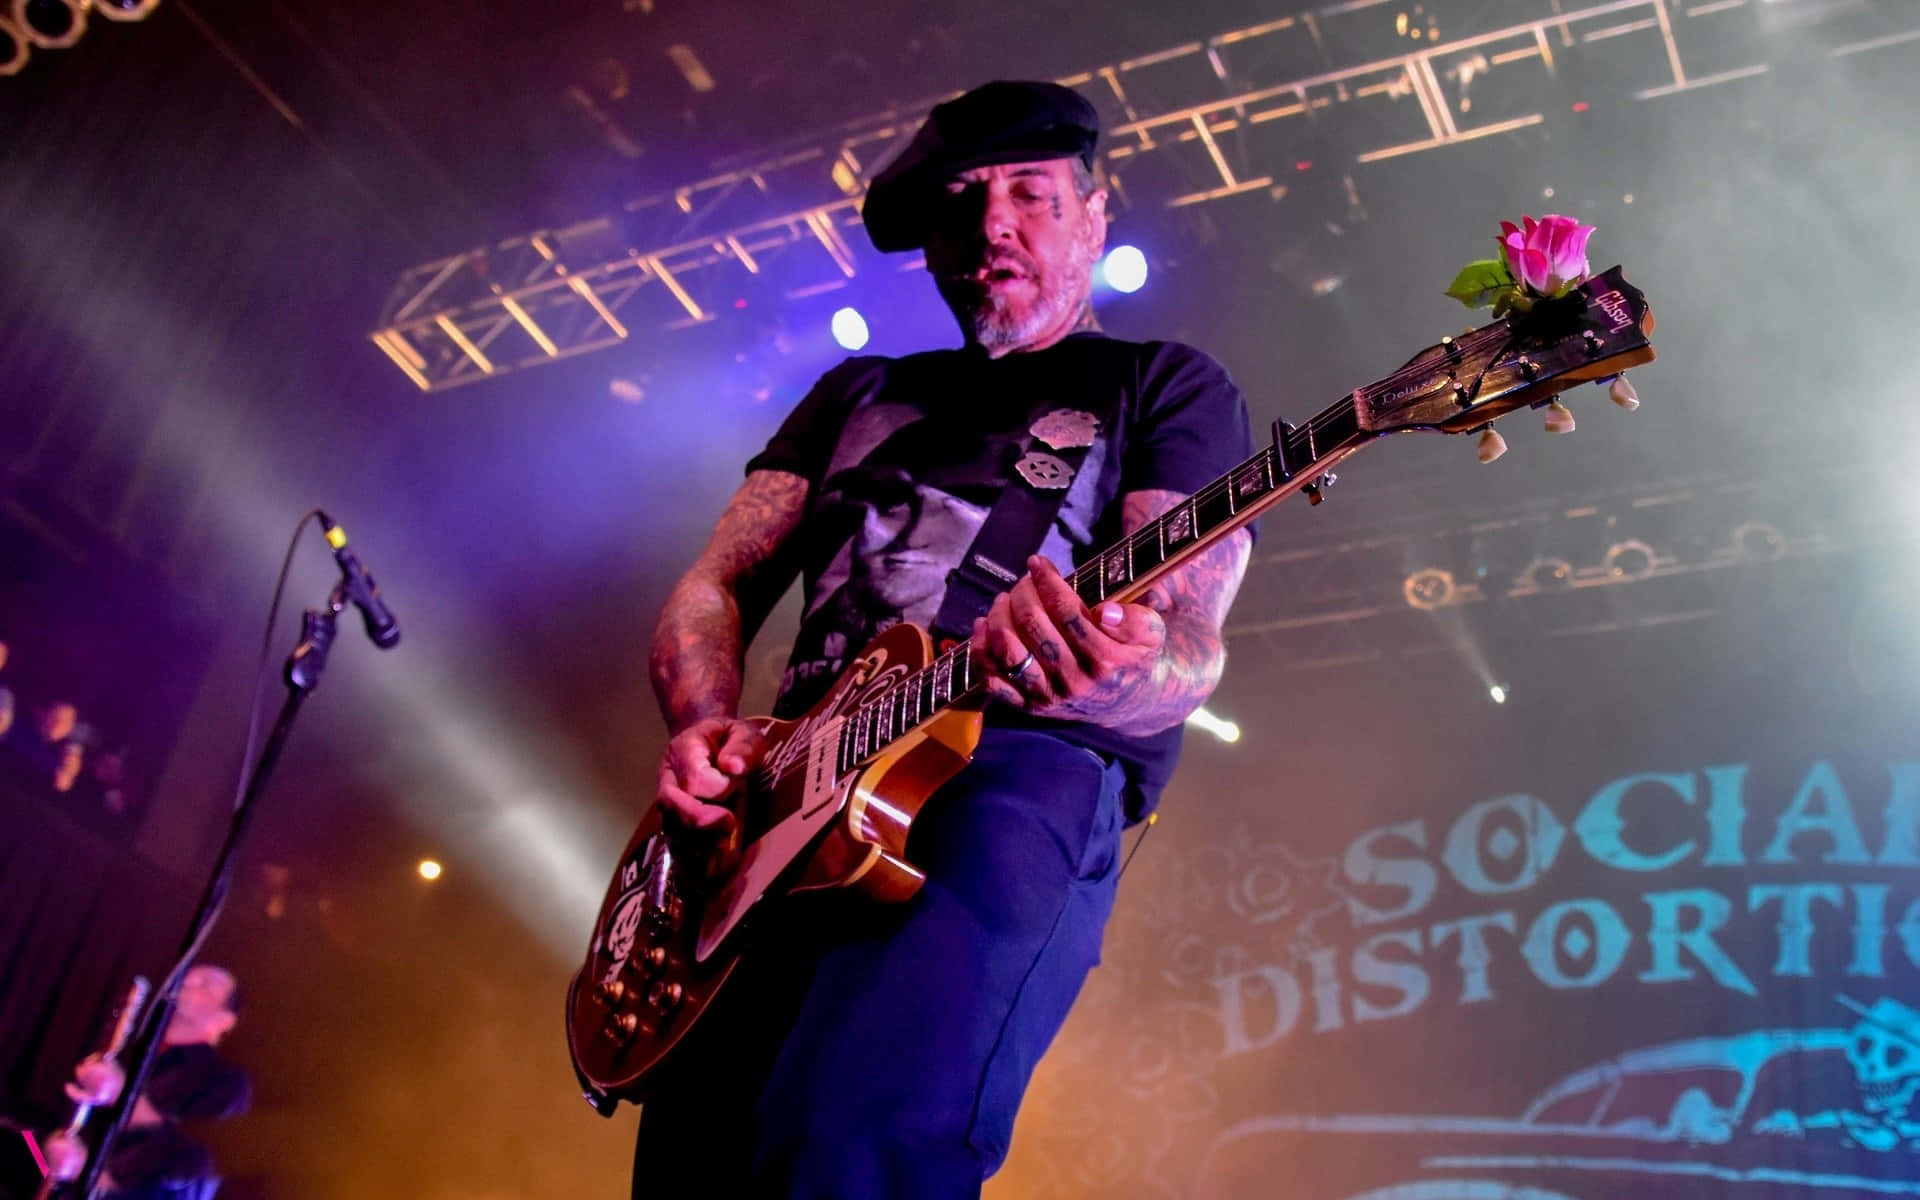 Frontmanmike Ness Social Distortion Translates To 